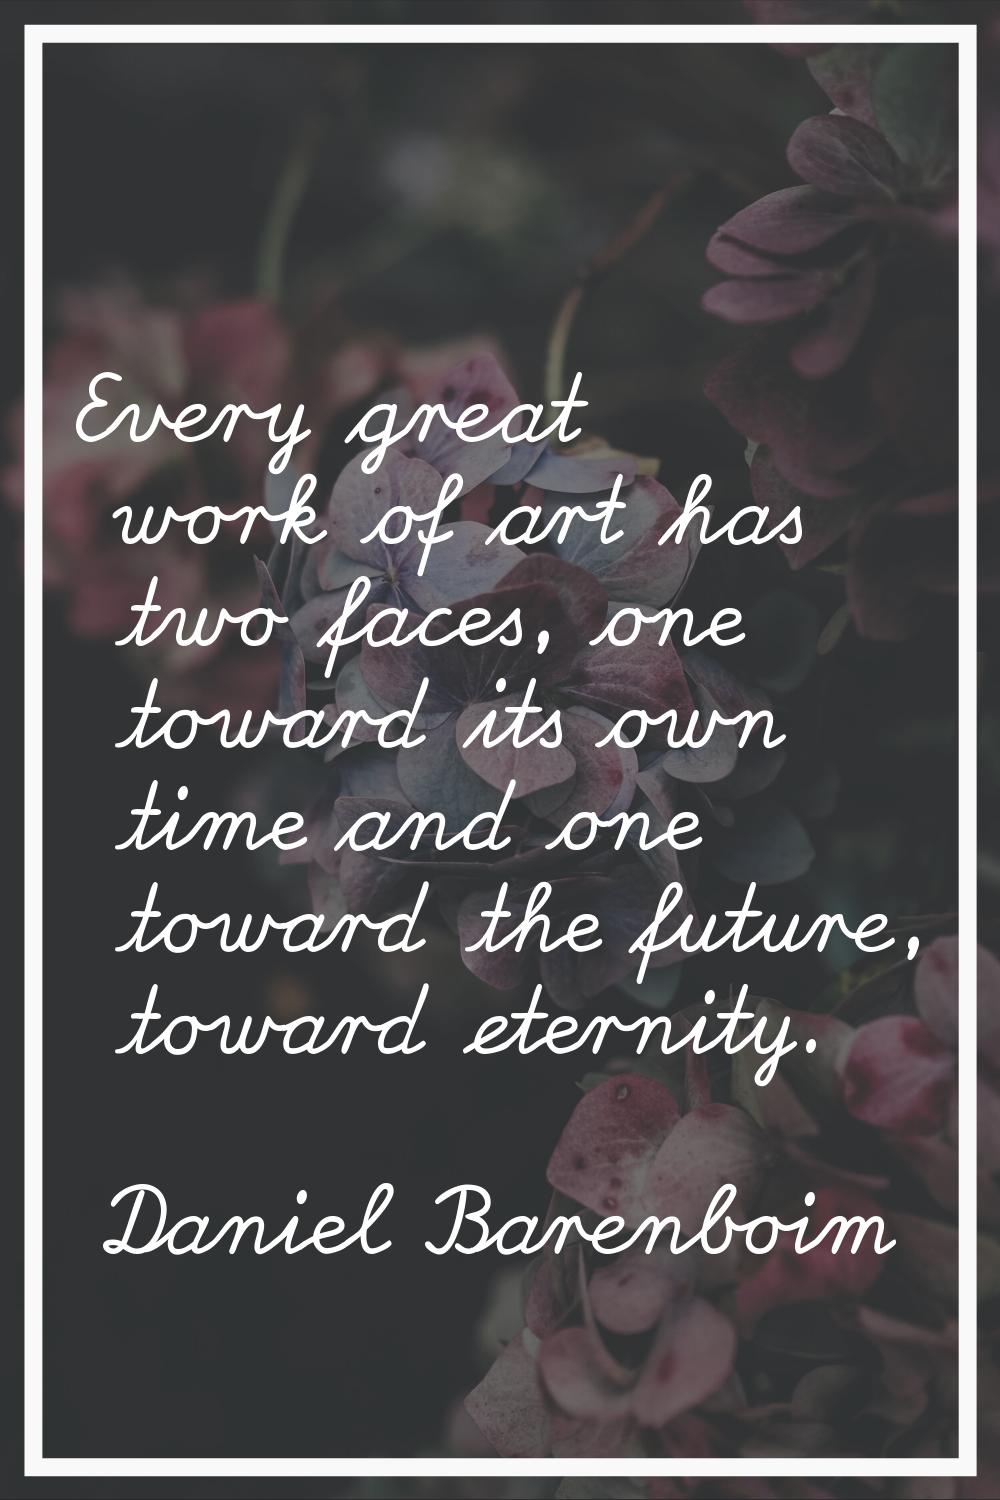 Every great work of art has two faces, one toward its own time and one toward the future, toward et